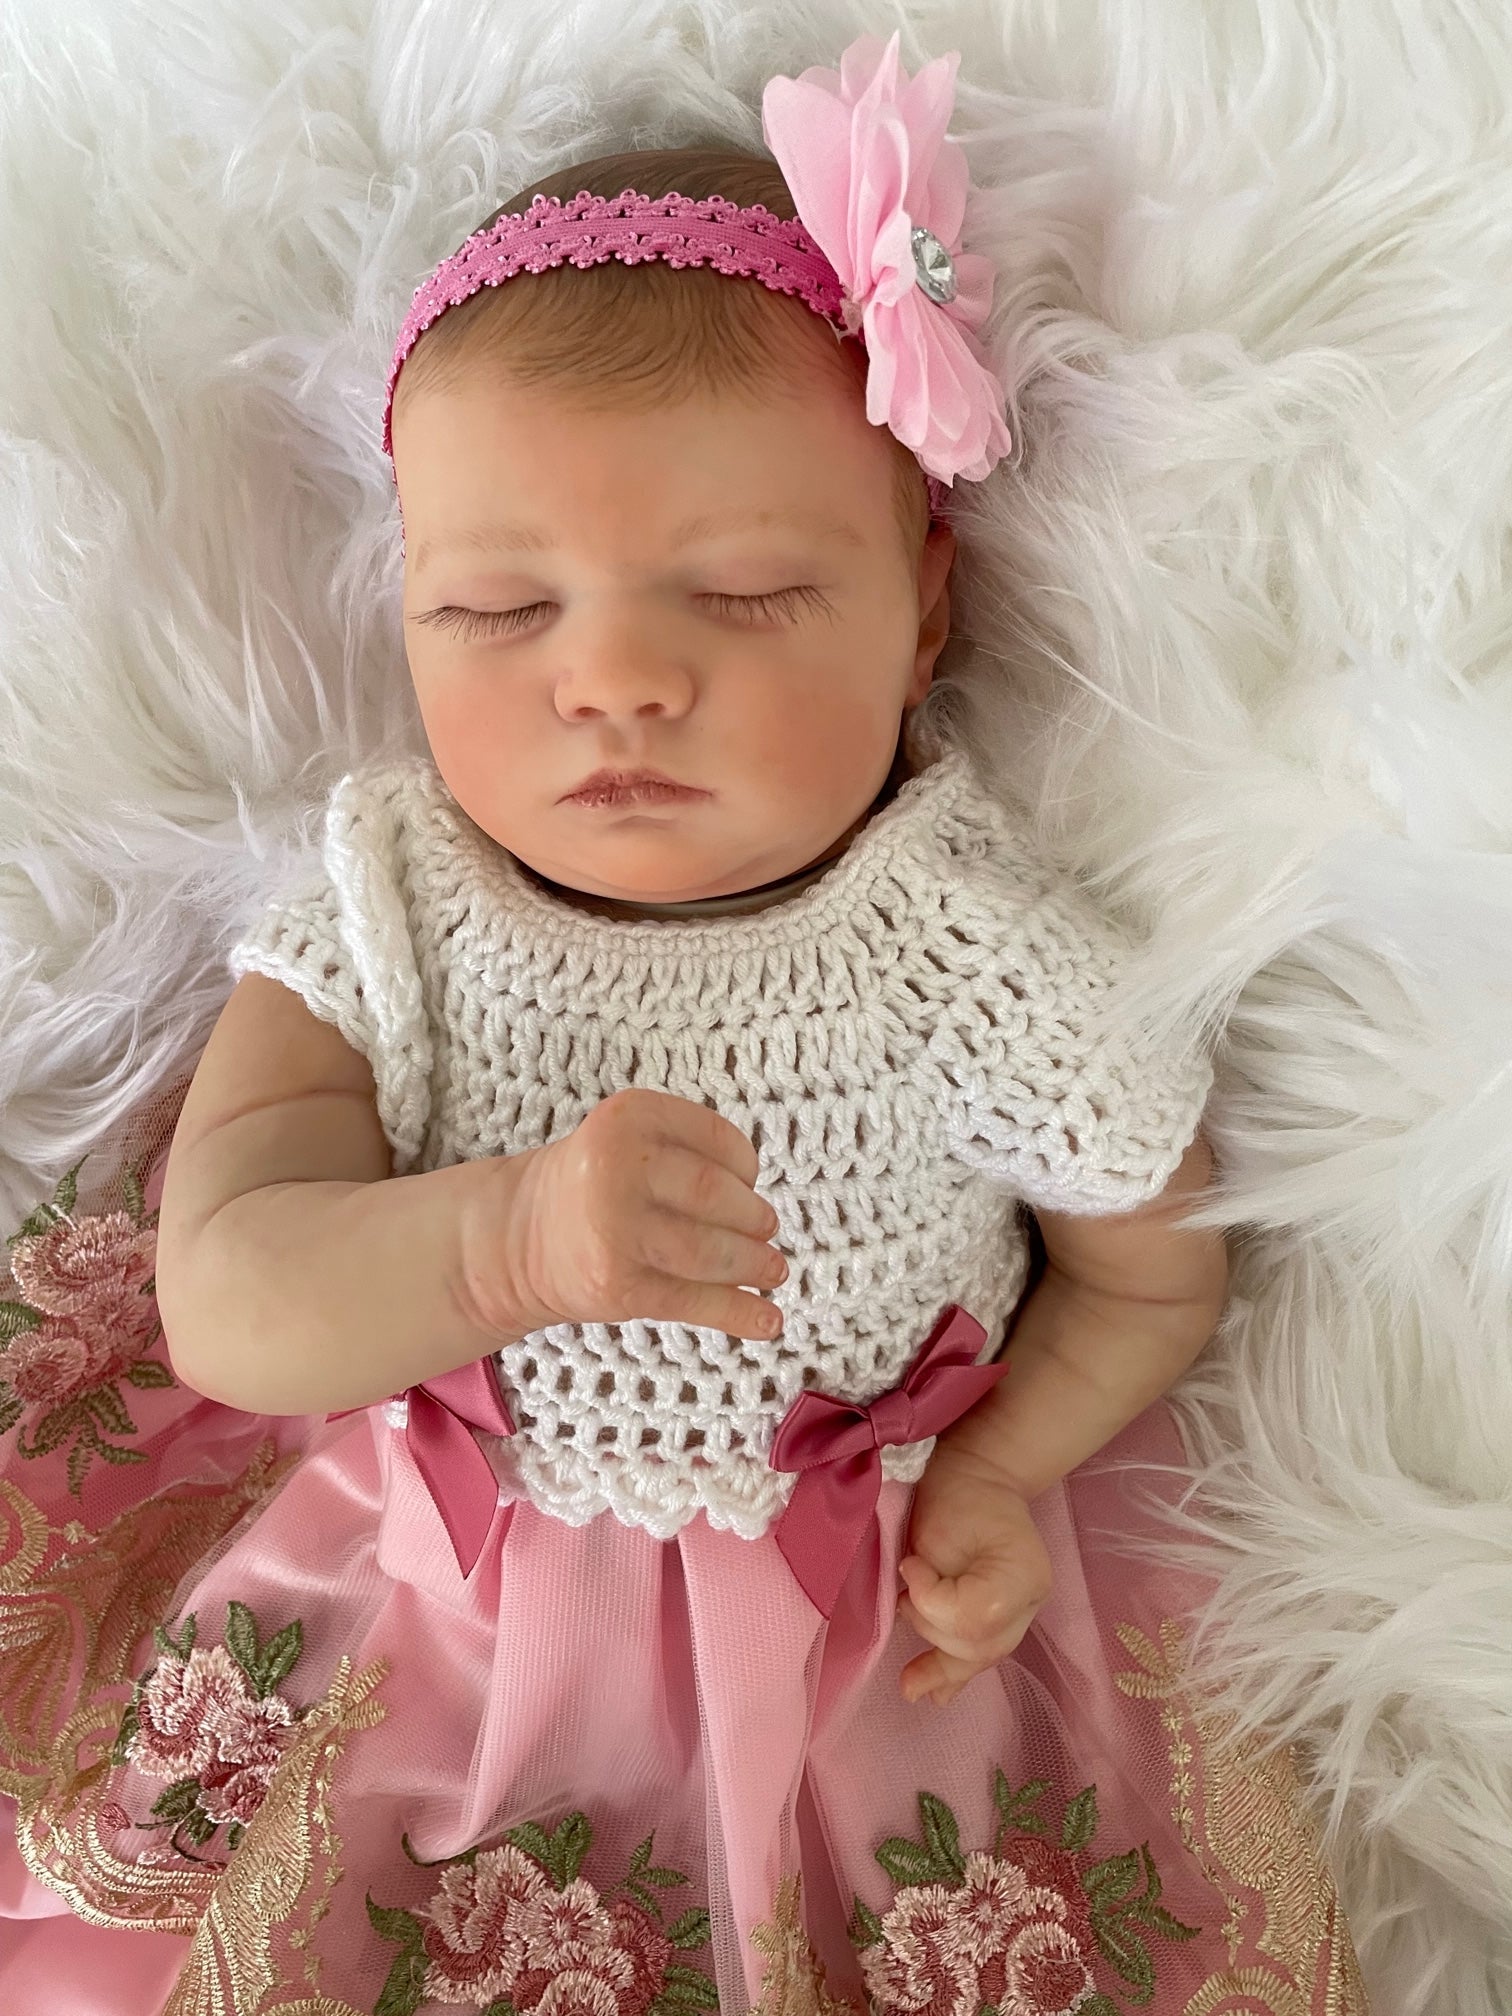 Reborn Baby Doll - Laila, so realistic and lifelike